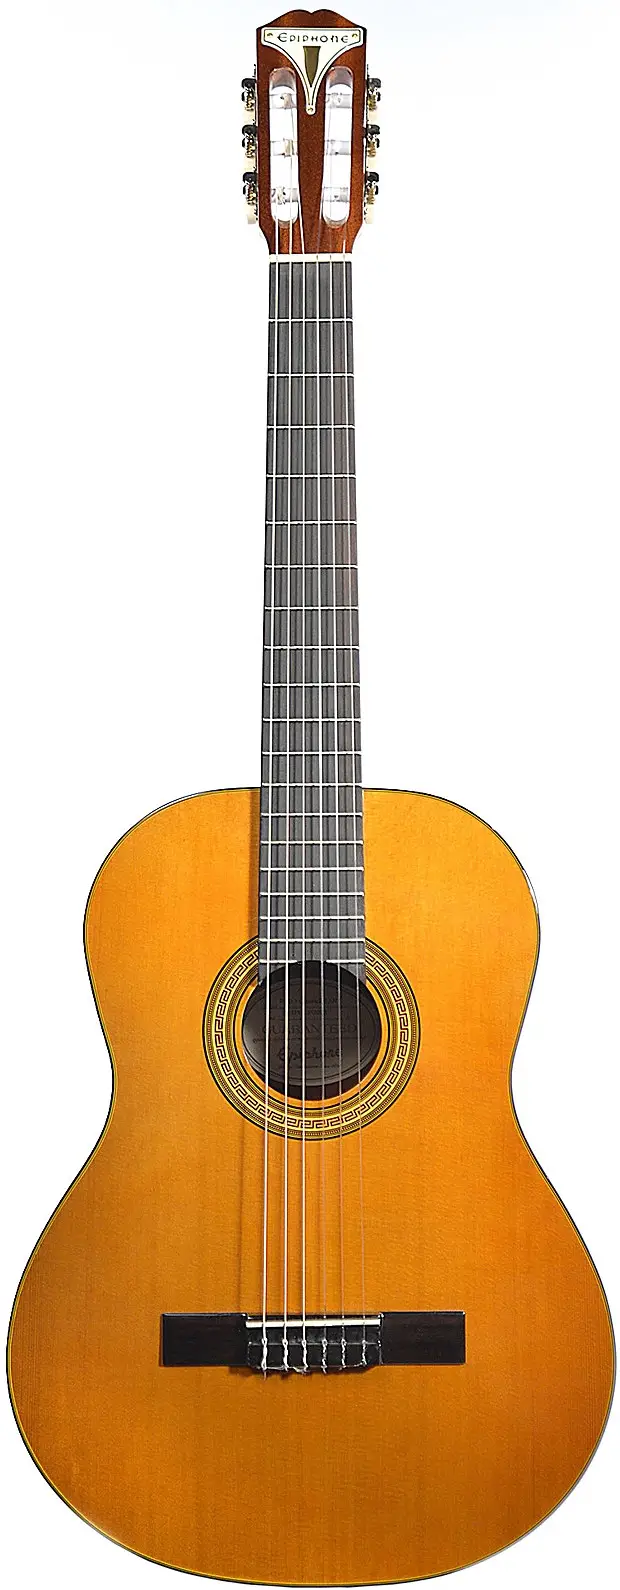 PRO-1 Spanish Classic by Epiphone